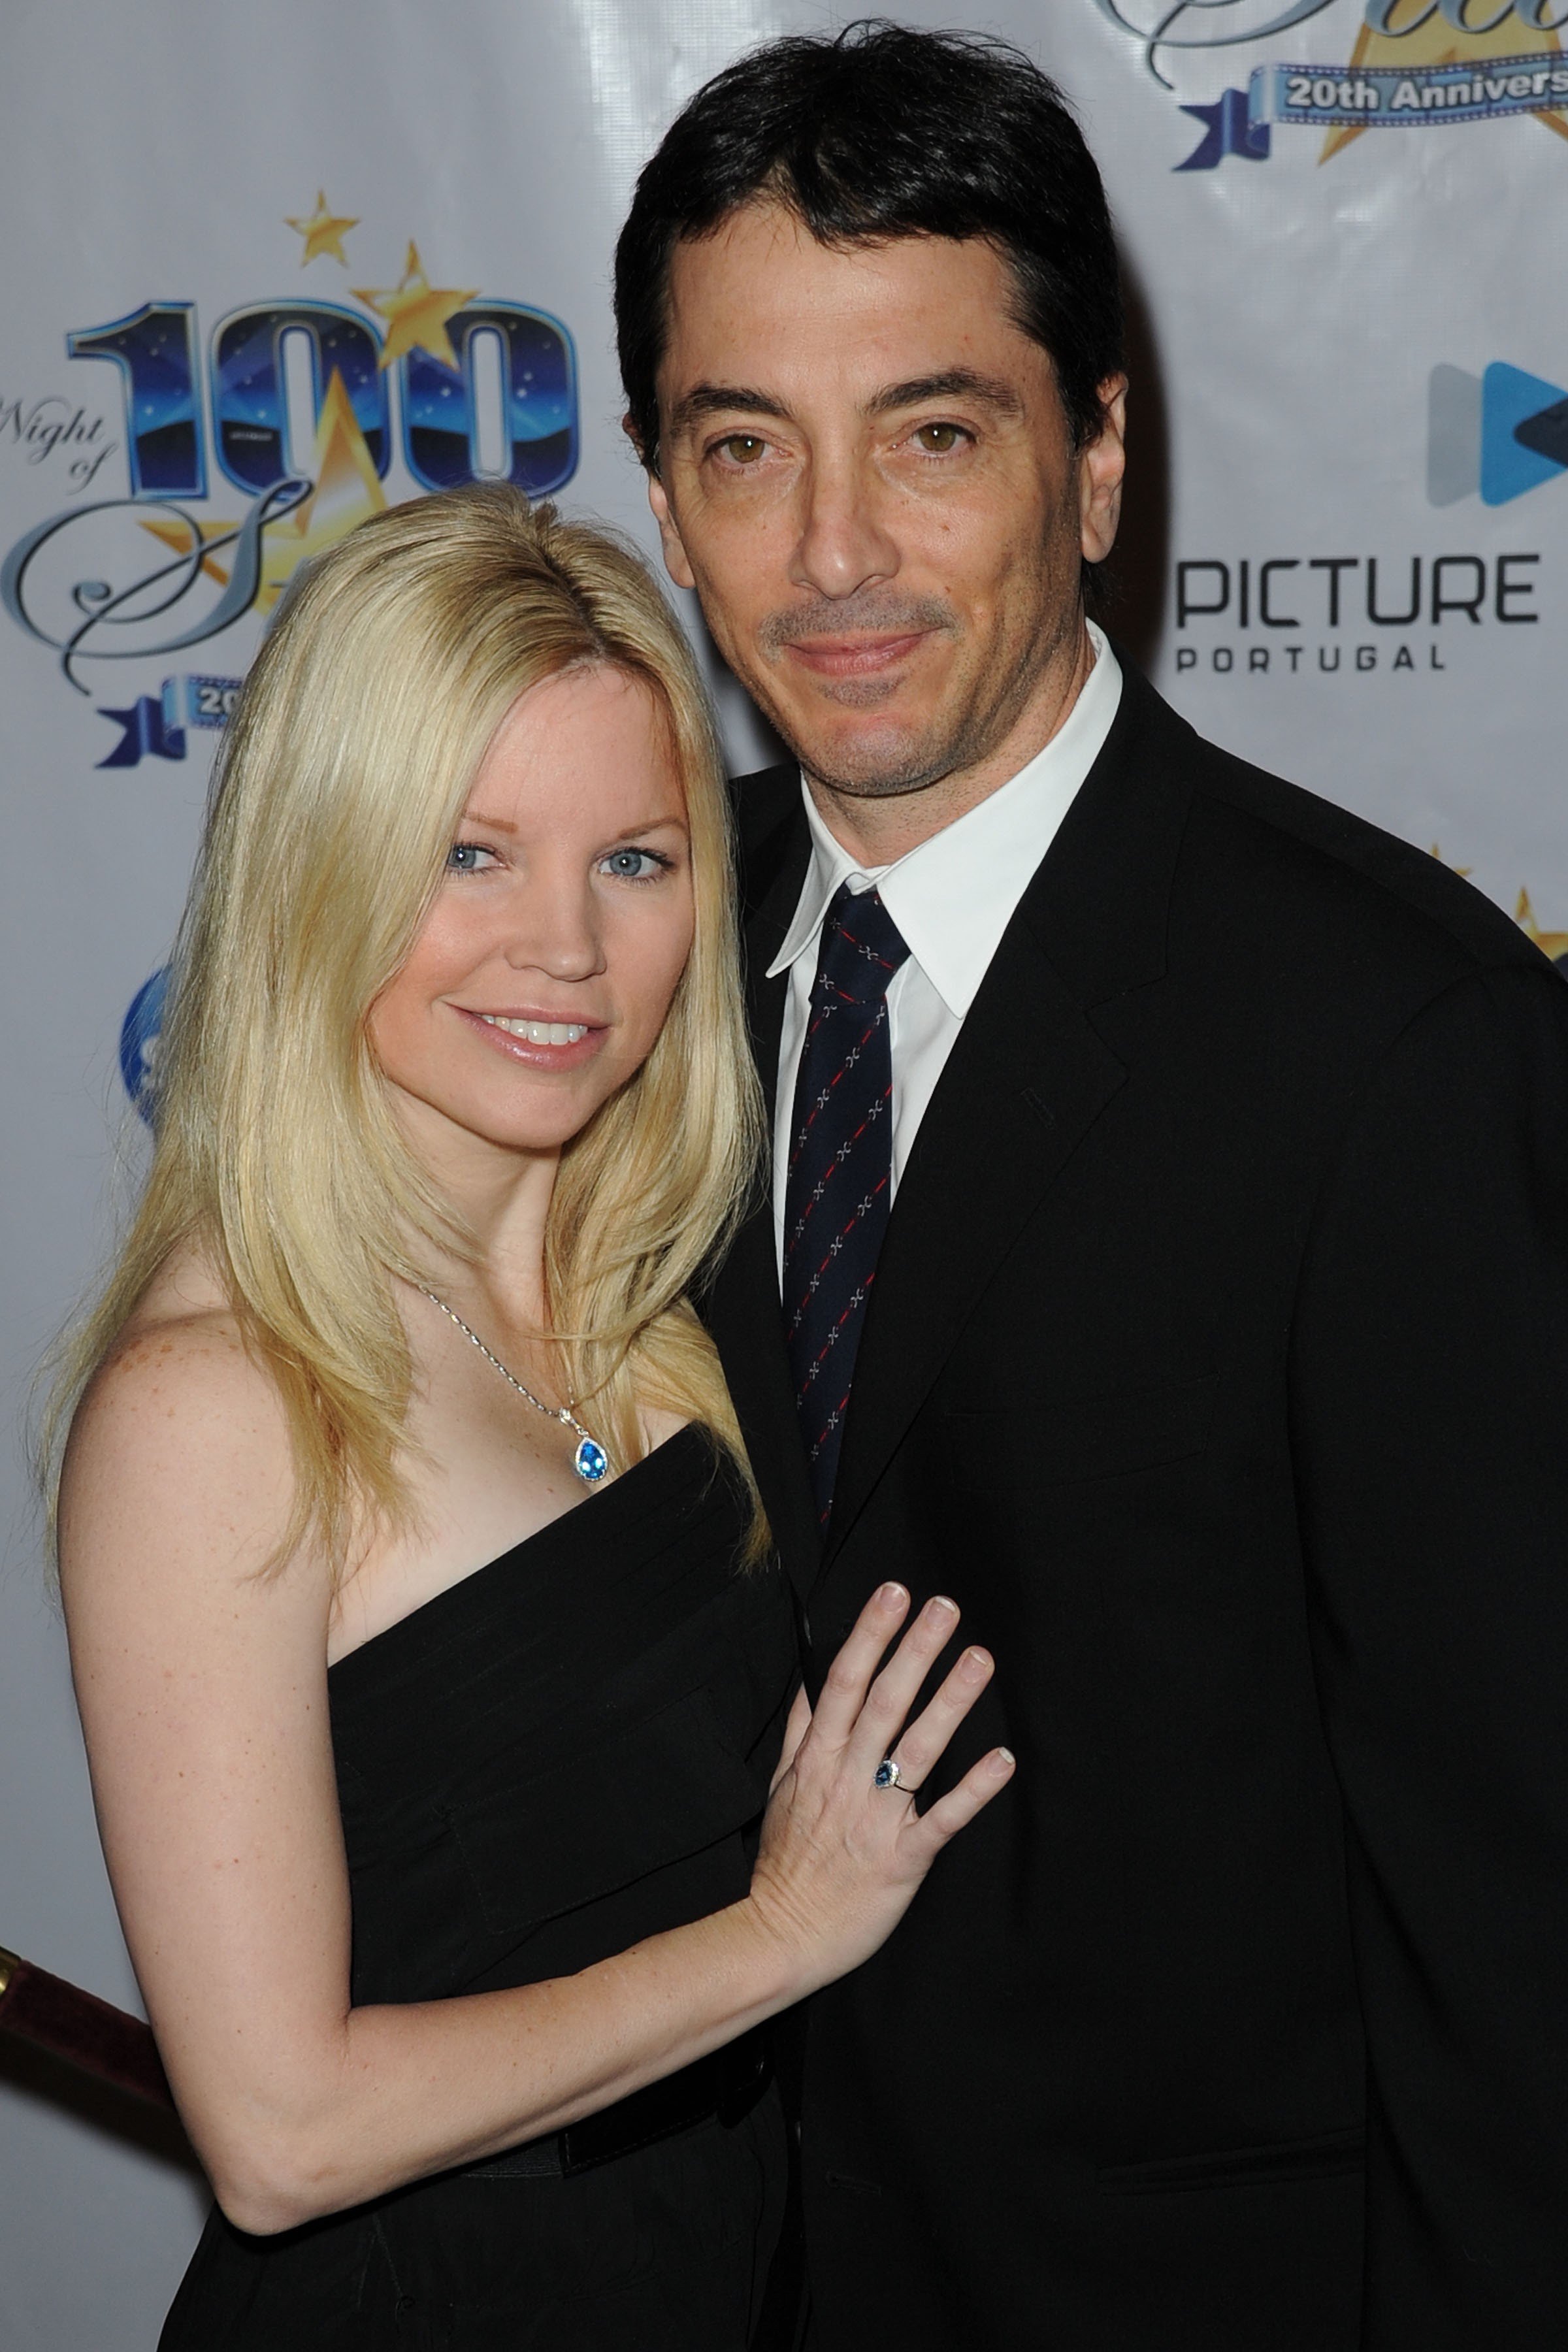 Renee Sloan and her husband Scott Baio attend "A Night of 100 Stars" at Beverly Hills Hotel on March 7, 2010, in Beverly Hills, California. | Source: Getty Images